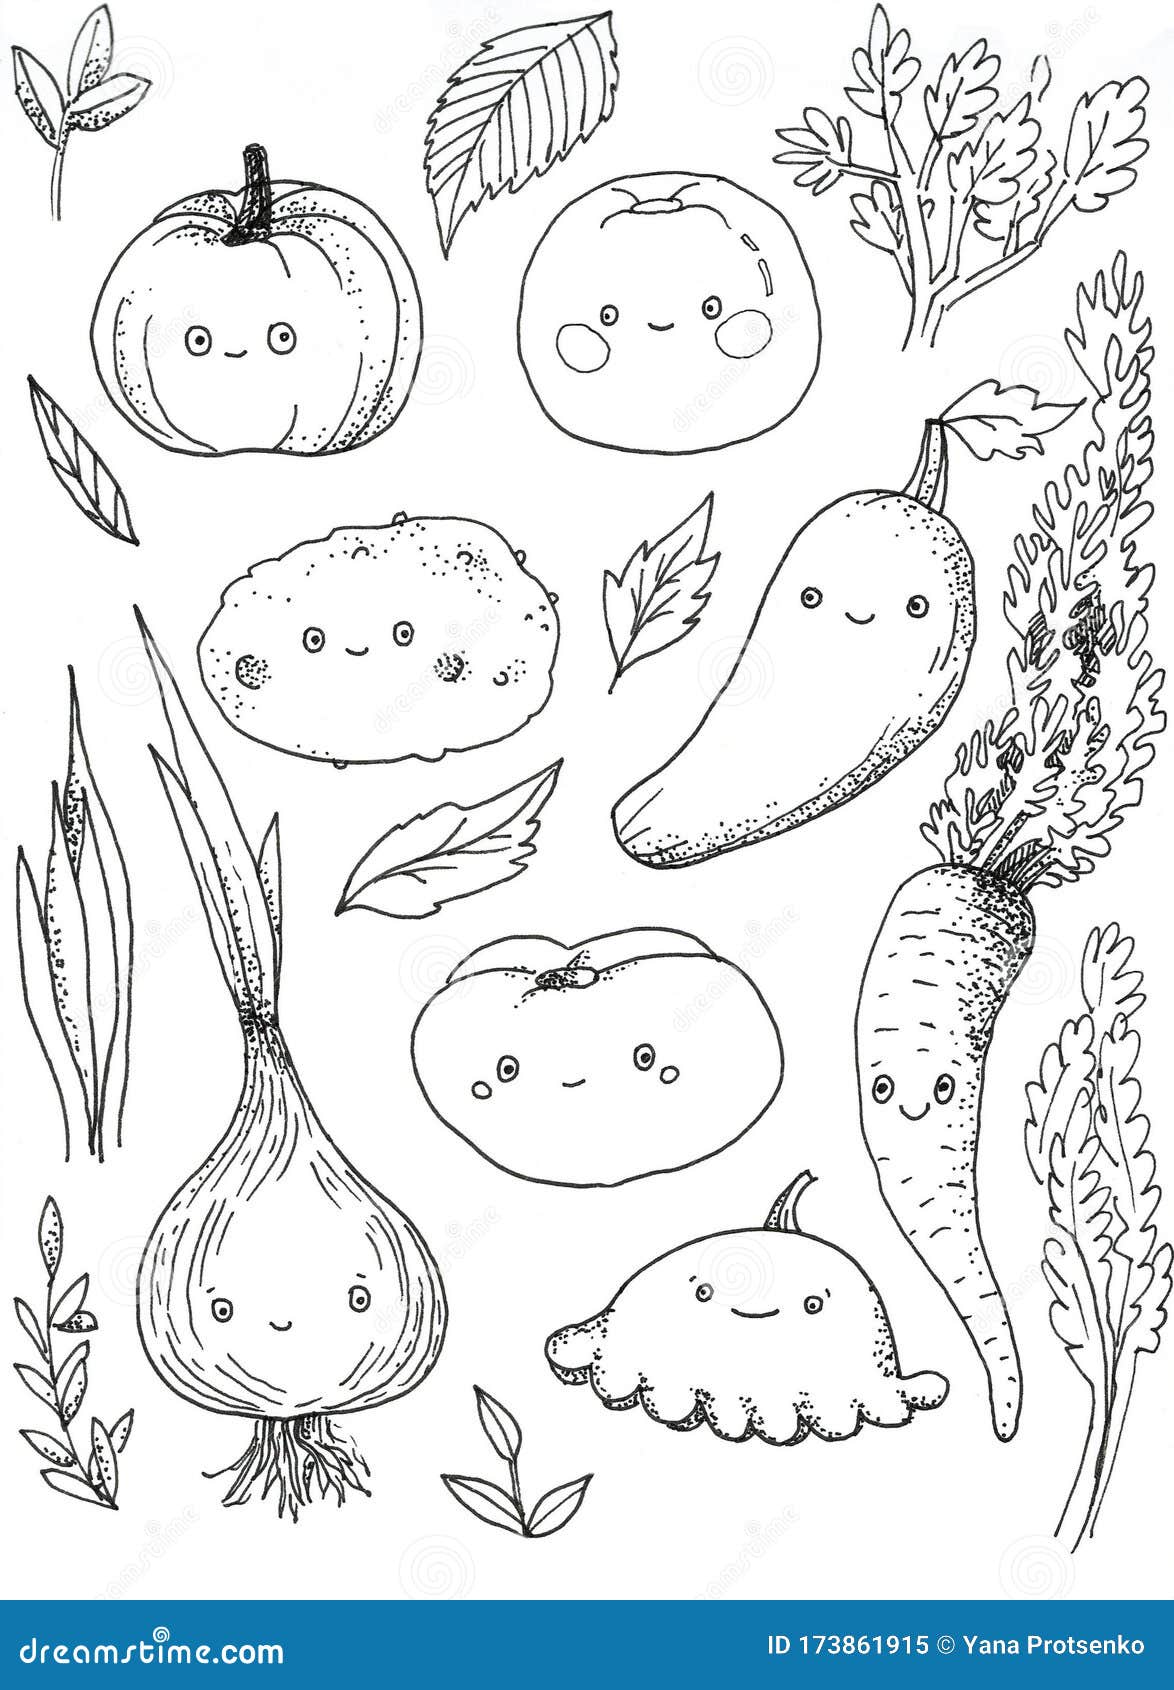 Coloring Book or Page Cartoon Illustration of Funny Food ...